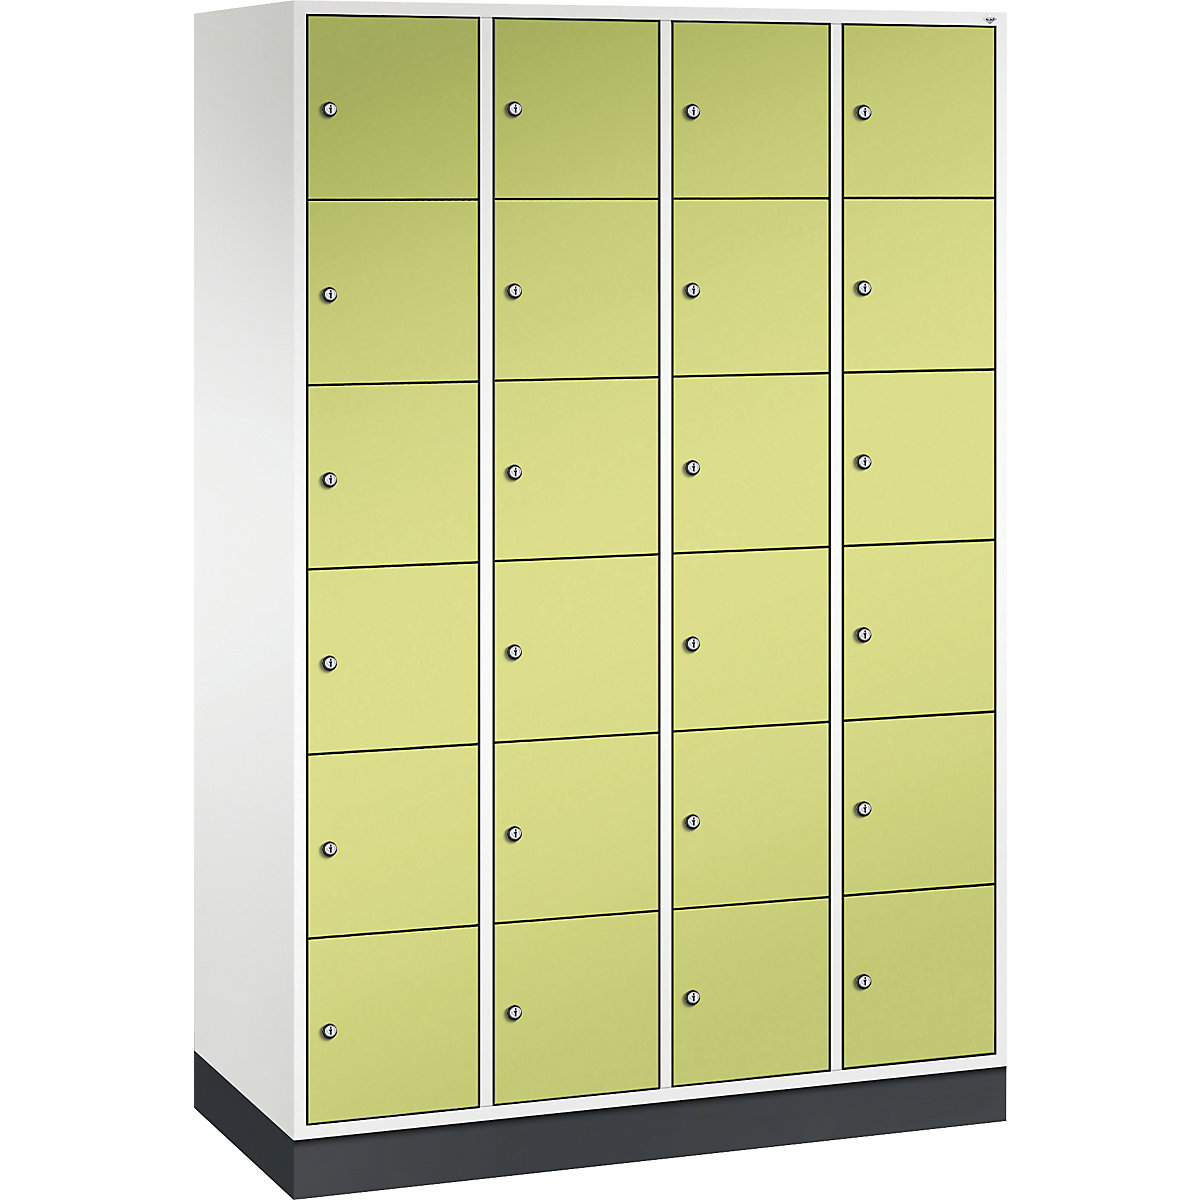 INTRO steel compartment locker, compartment height 285 mm – C+P, WxD 1220 x 500 mm, 24 compartments, pure white body, viridian green doors-7